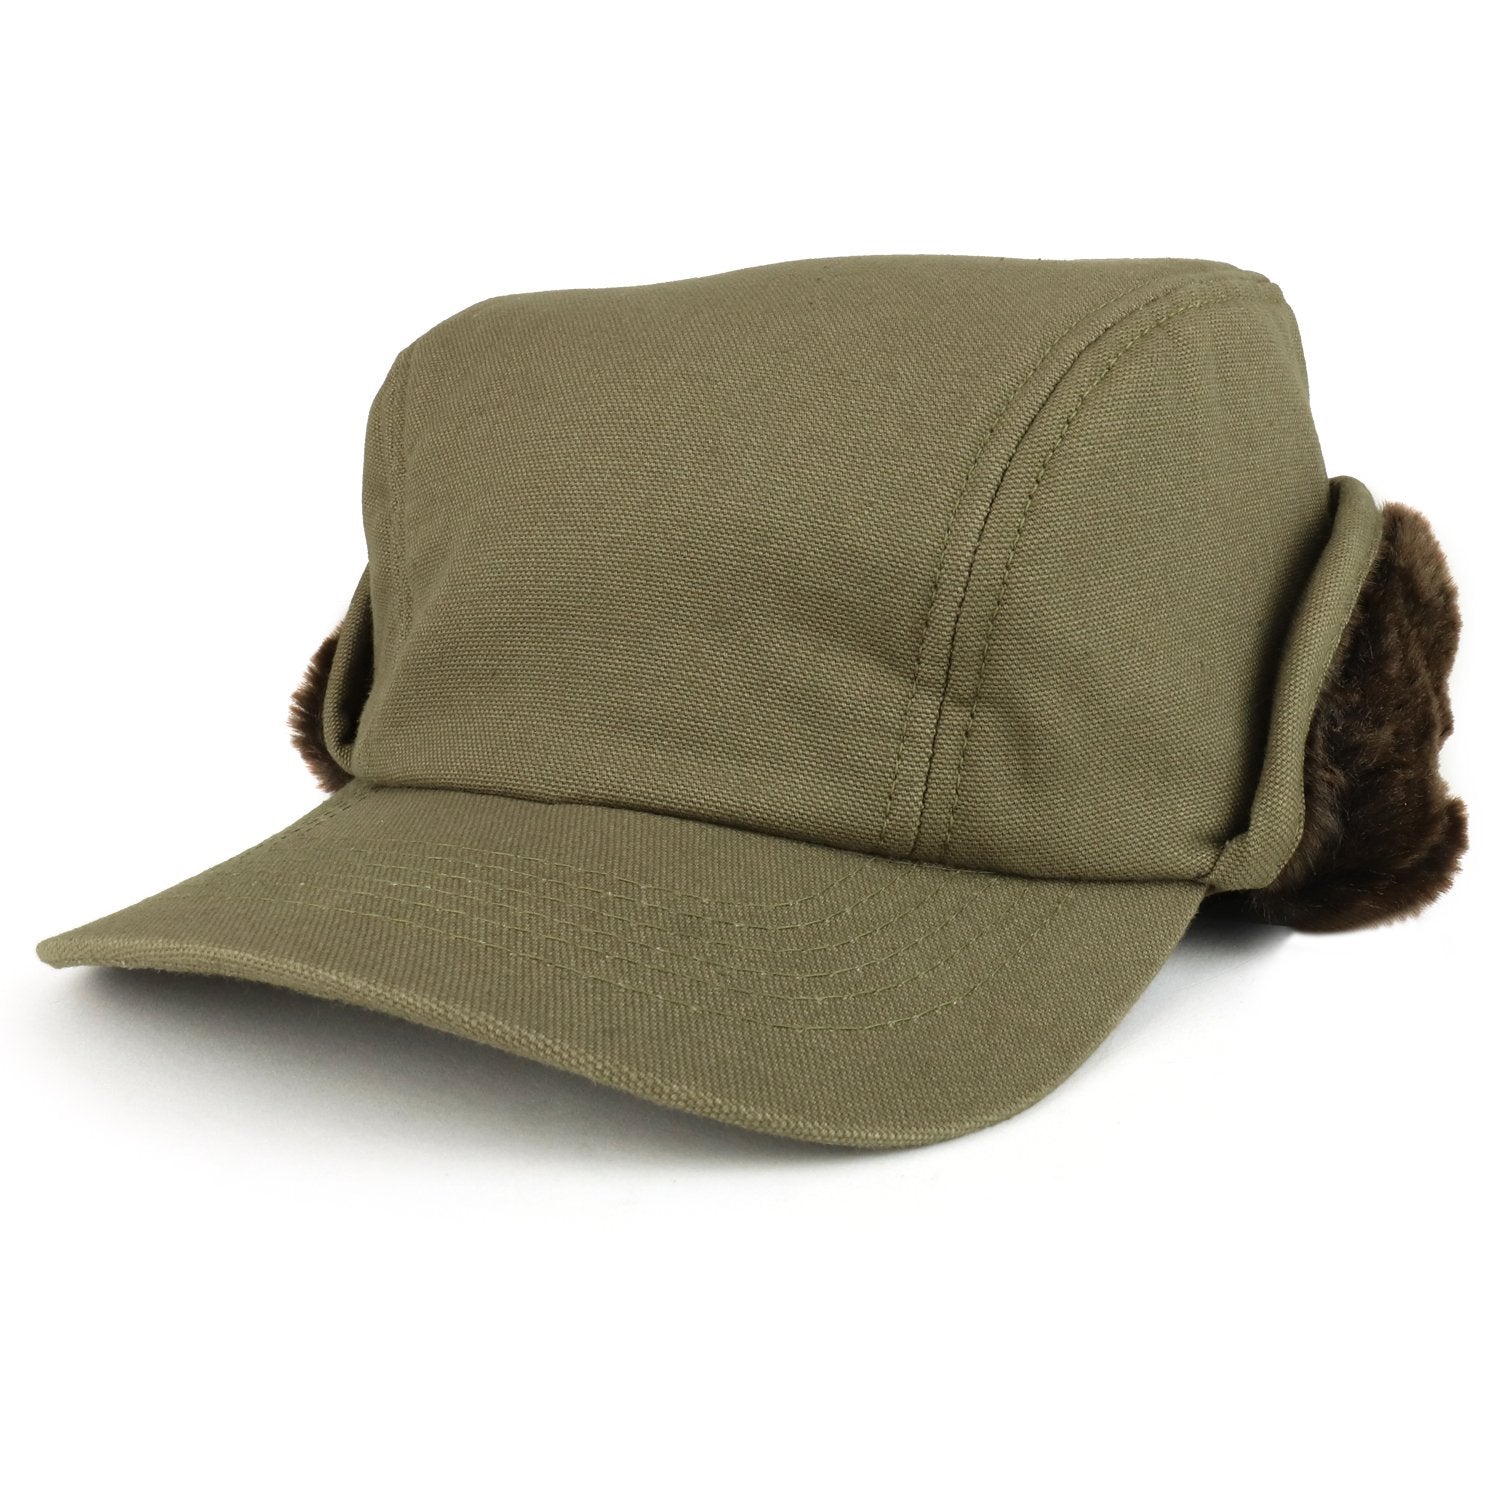 Armycrew Men's Duck Work Superior Cotton Winter Ball Cap with Earflap - Brown